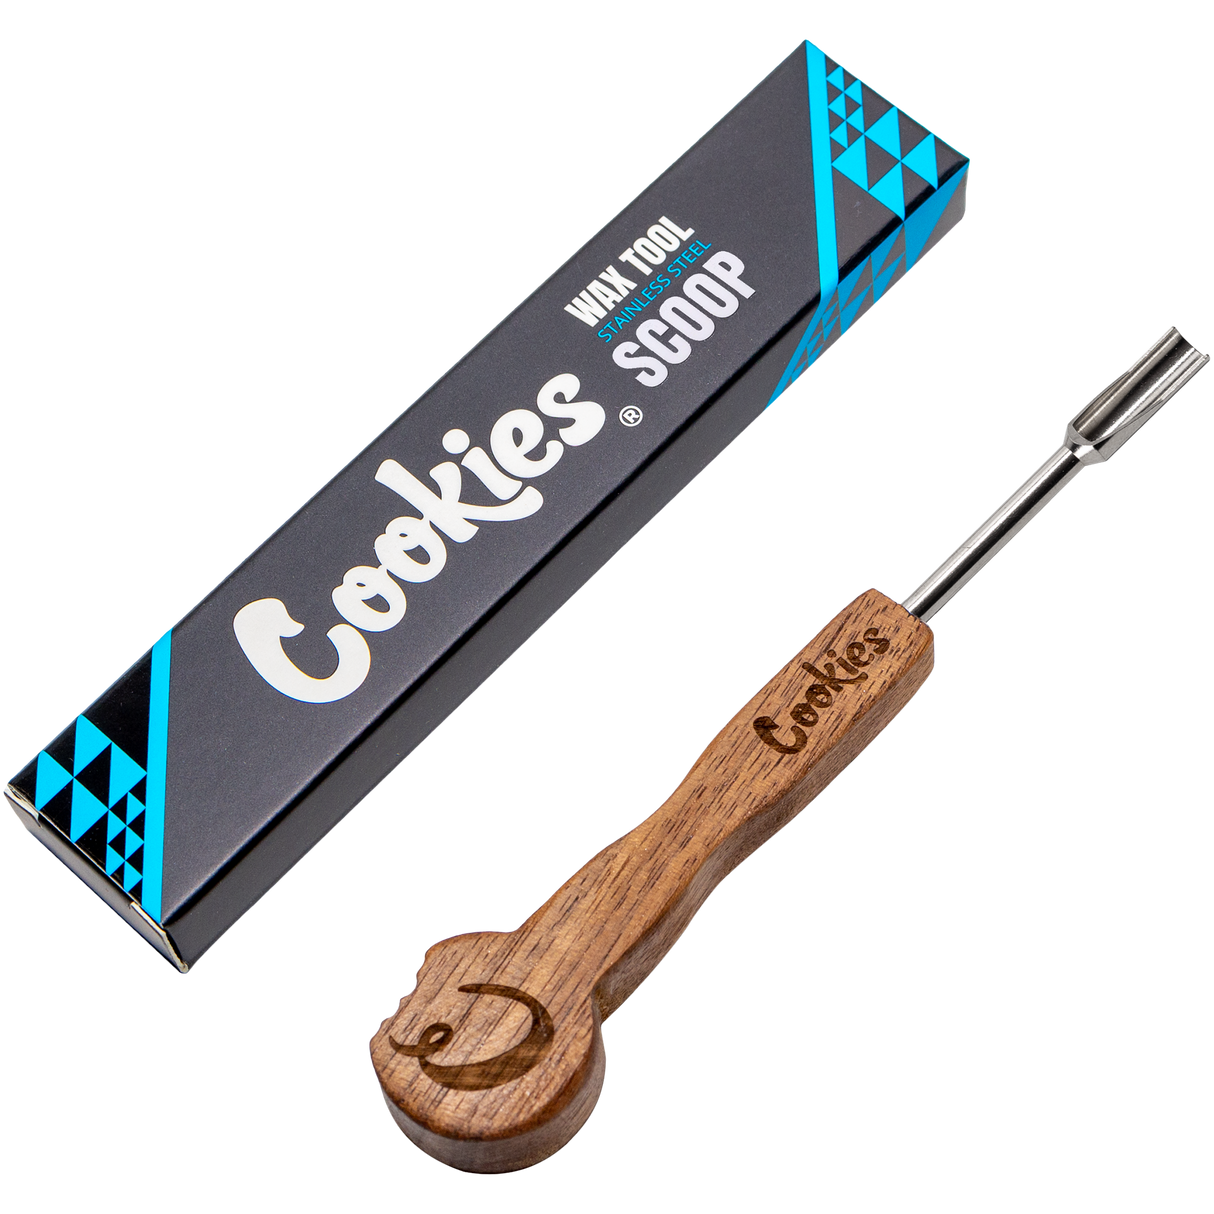 Cookies Wax Tool SS Scoop with wooden handle and steel tip, packaging visible, side view